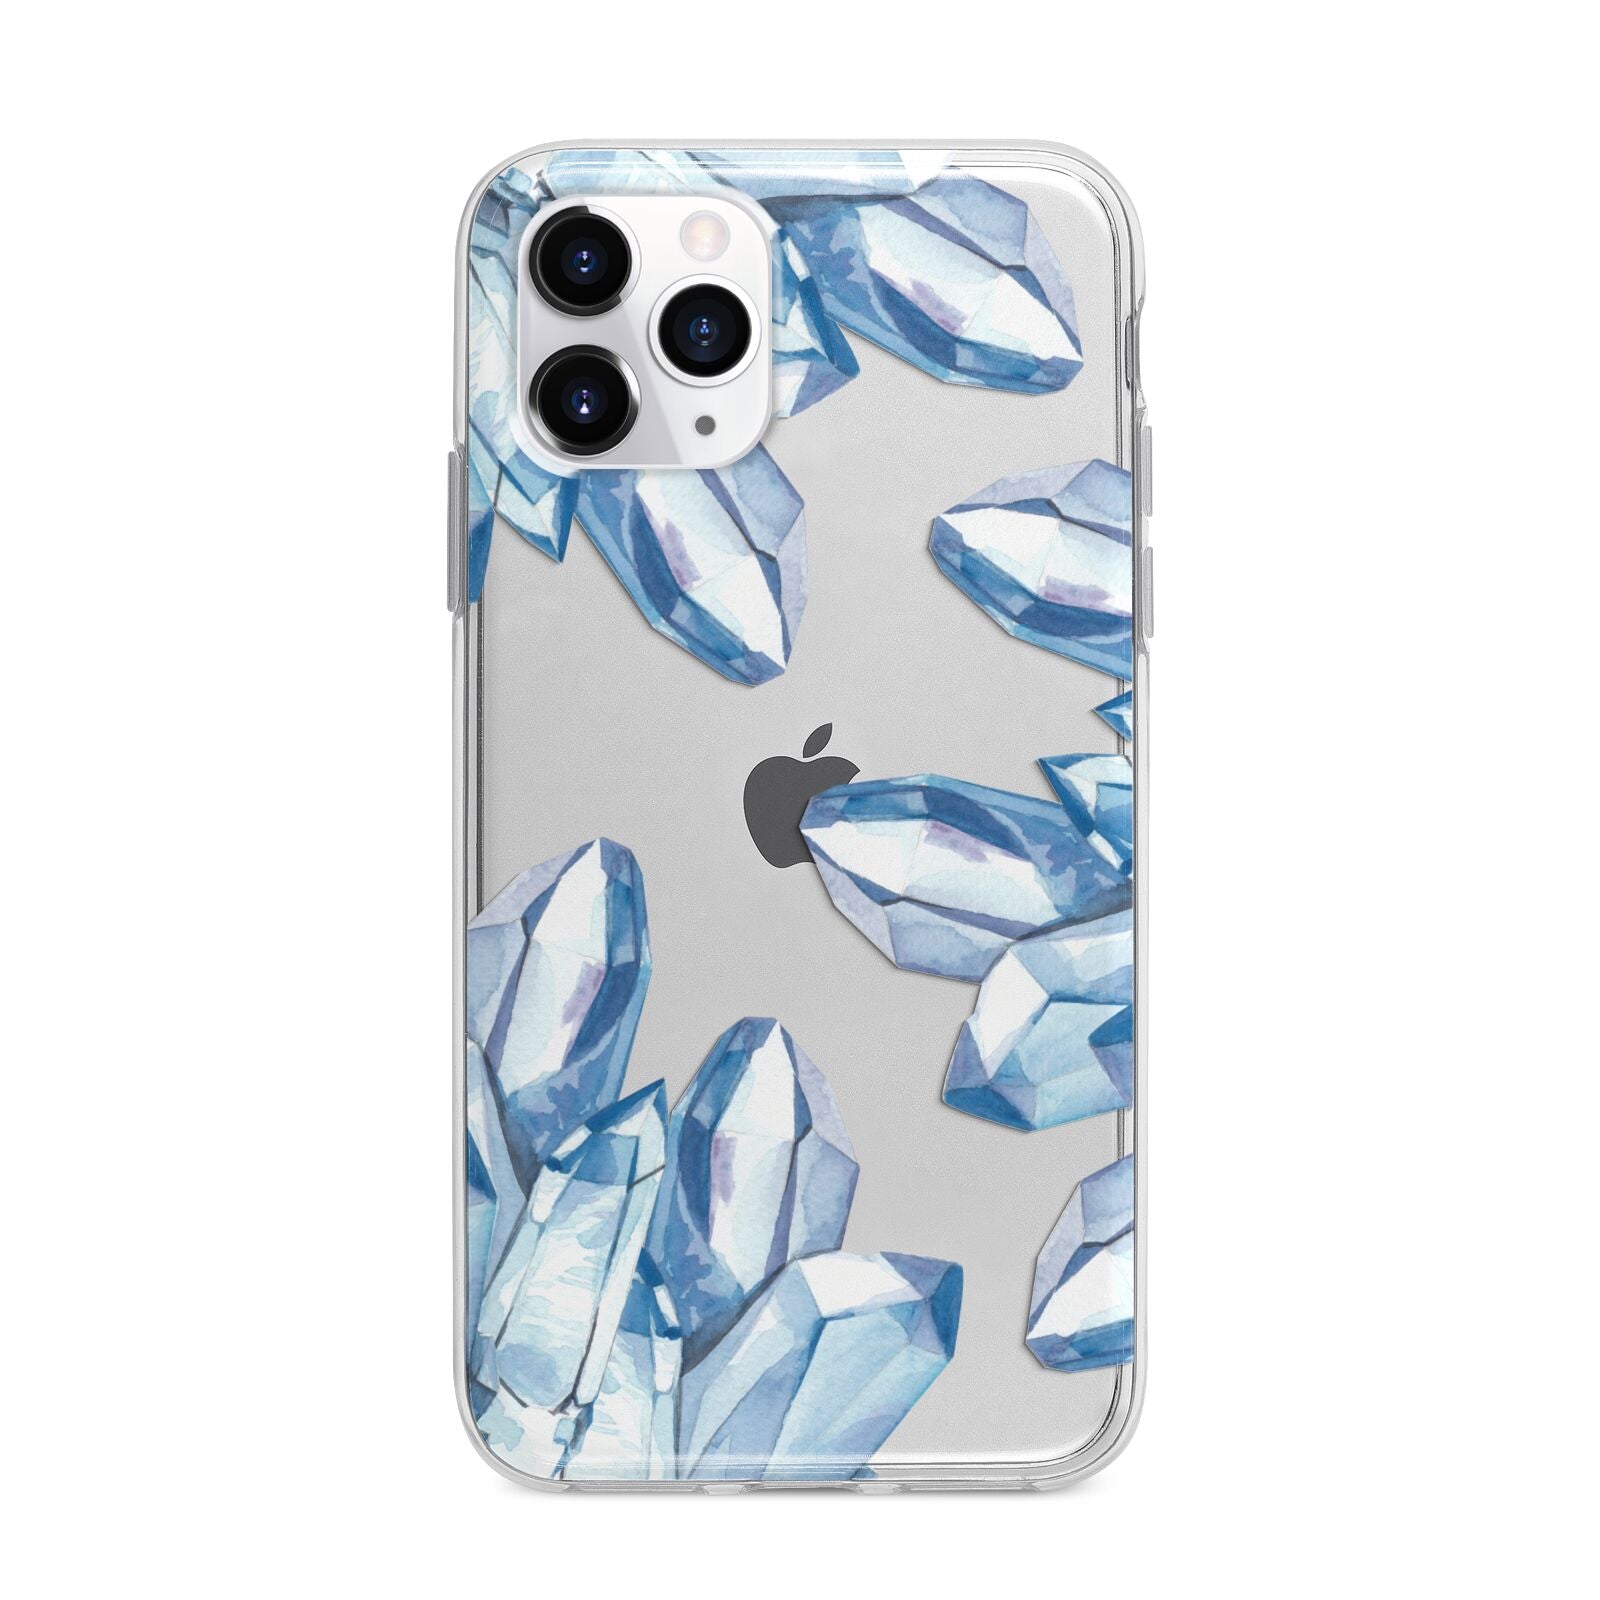 Blue Crystals Apple iPhone 11 Pro Max in Silver with Bumper Case